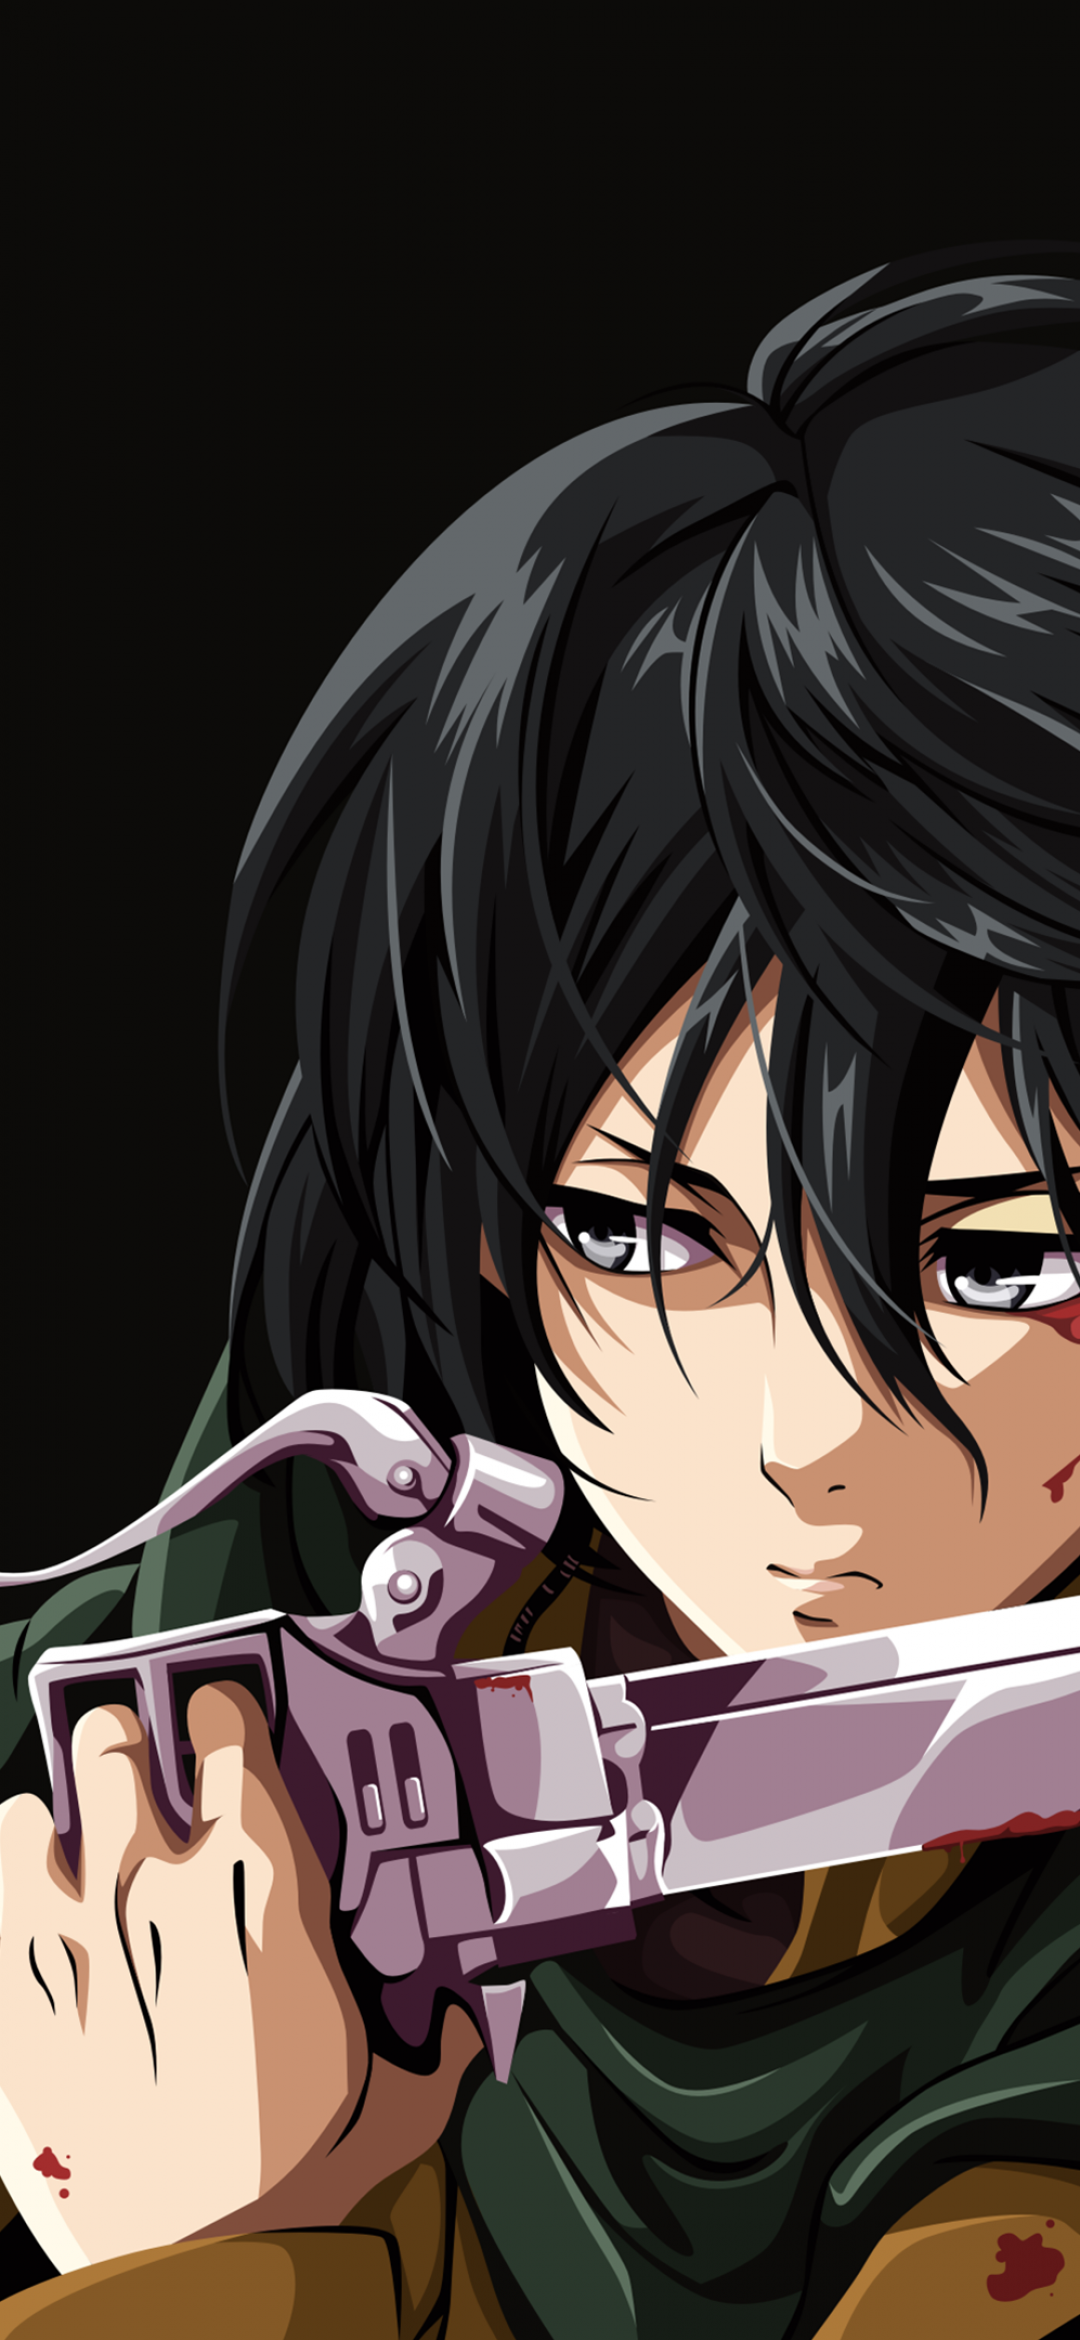 50 Mikasa Ackerman Wallpapers for iPhone and Android by Chelsea Reed